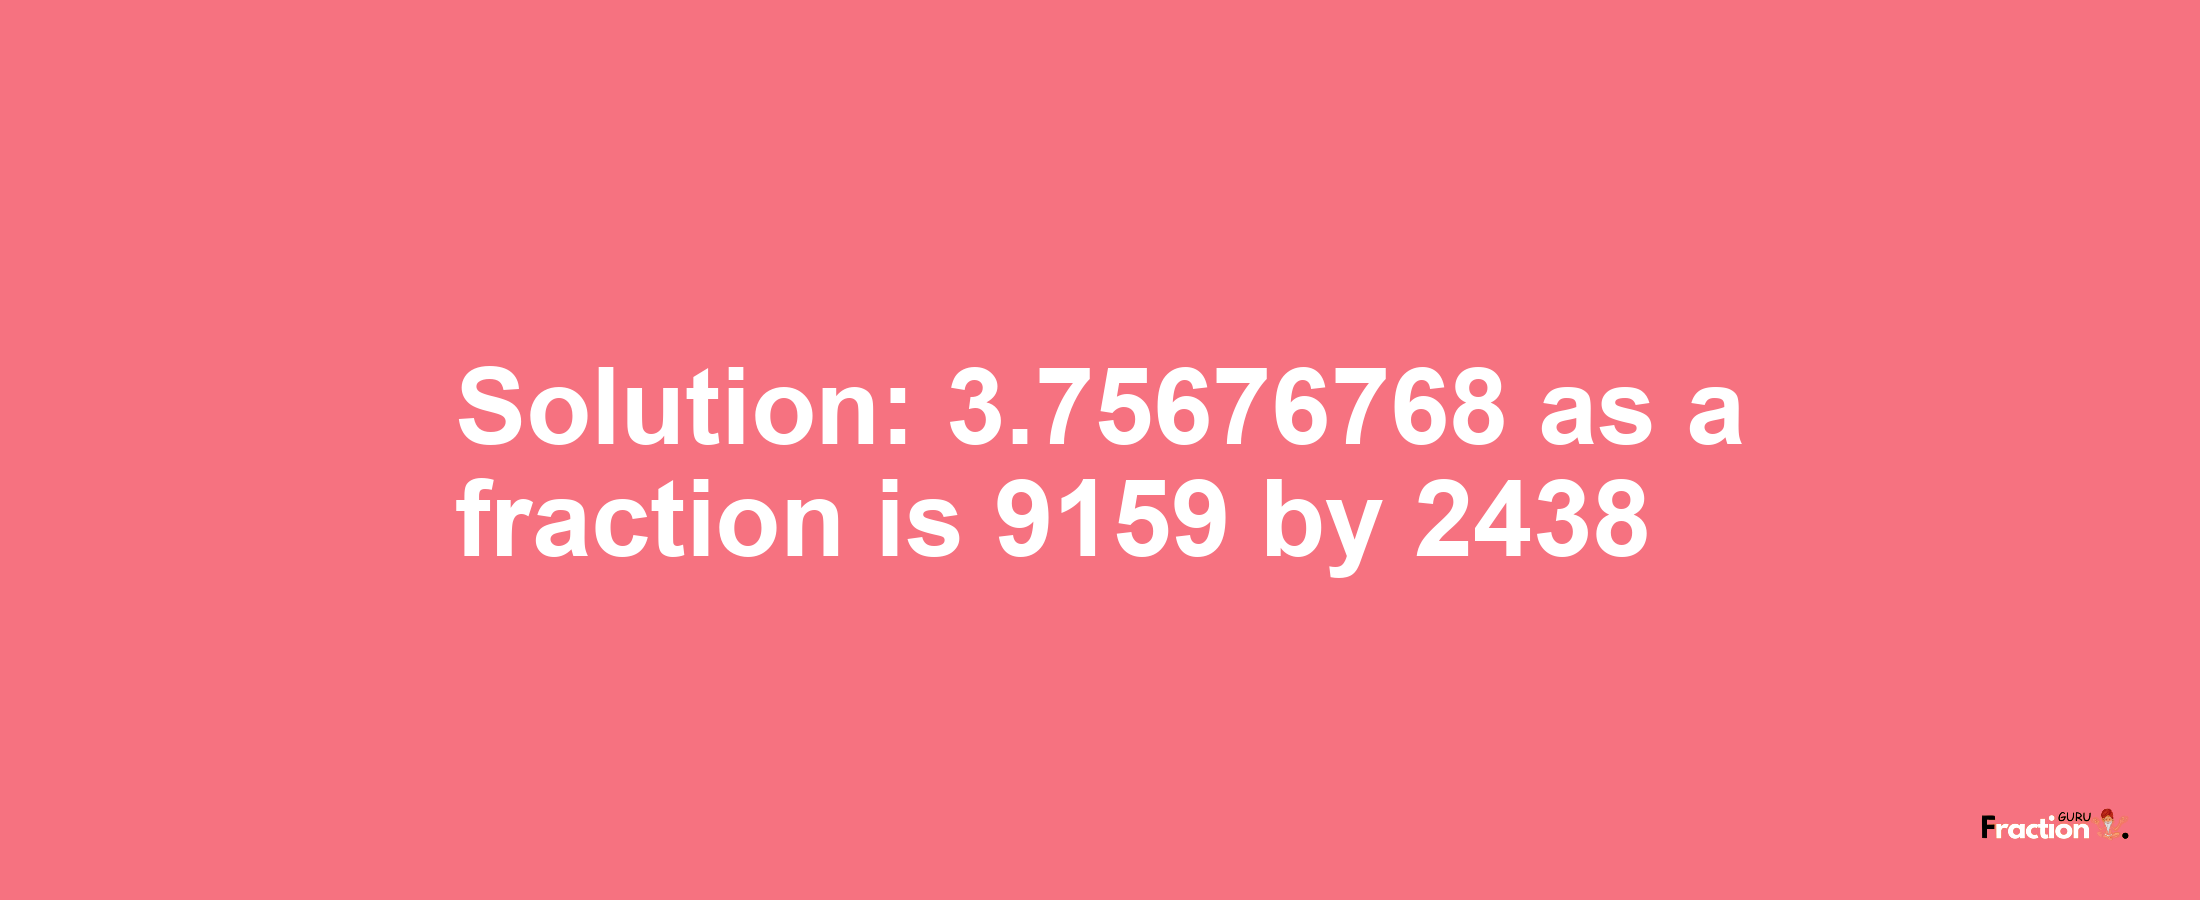 Solution:3.75676768 as a fraction is 9159/2438